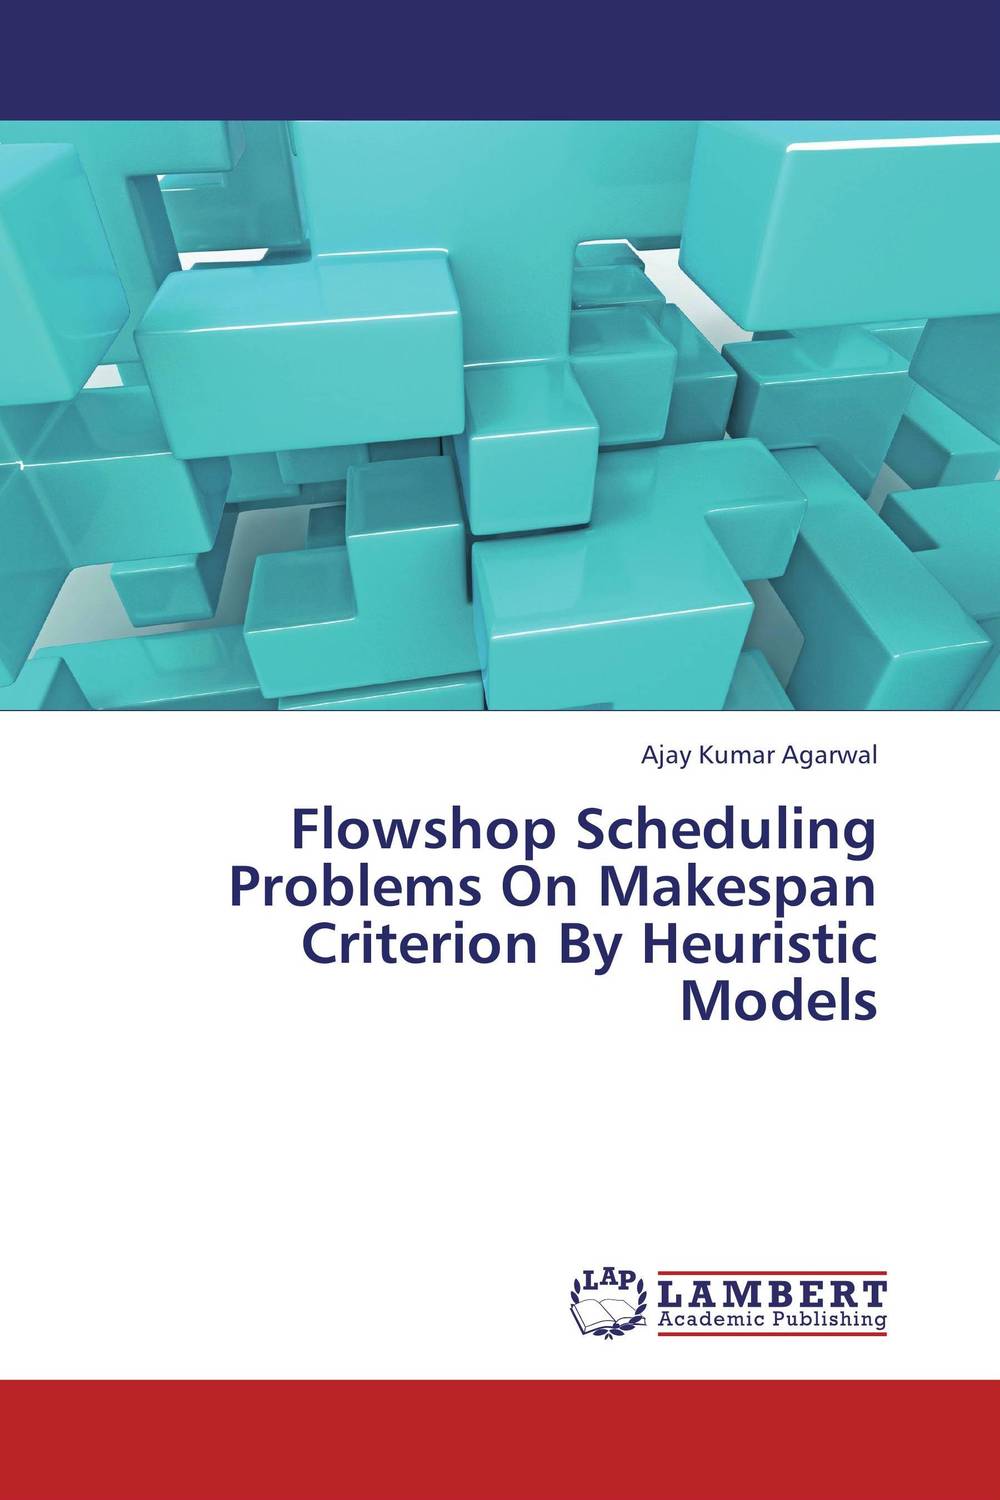 Flowshop Scheduling Problems On Makespan Criterion By Heuristic Models